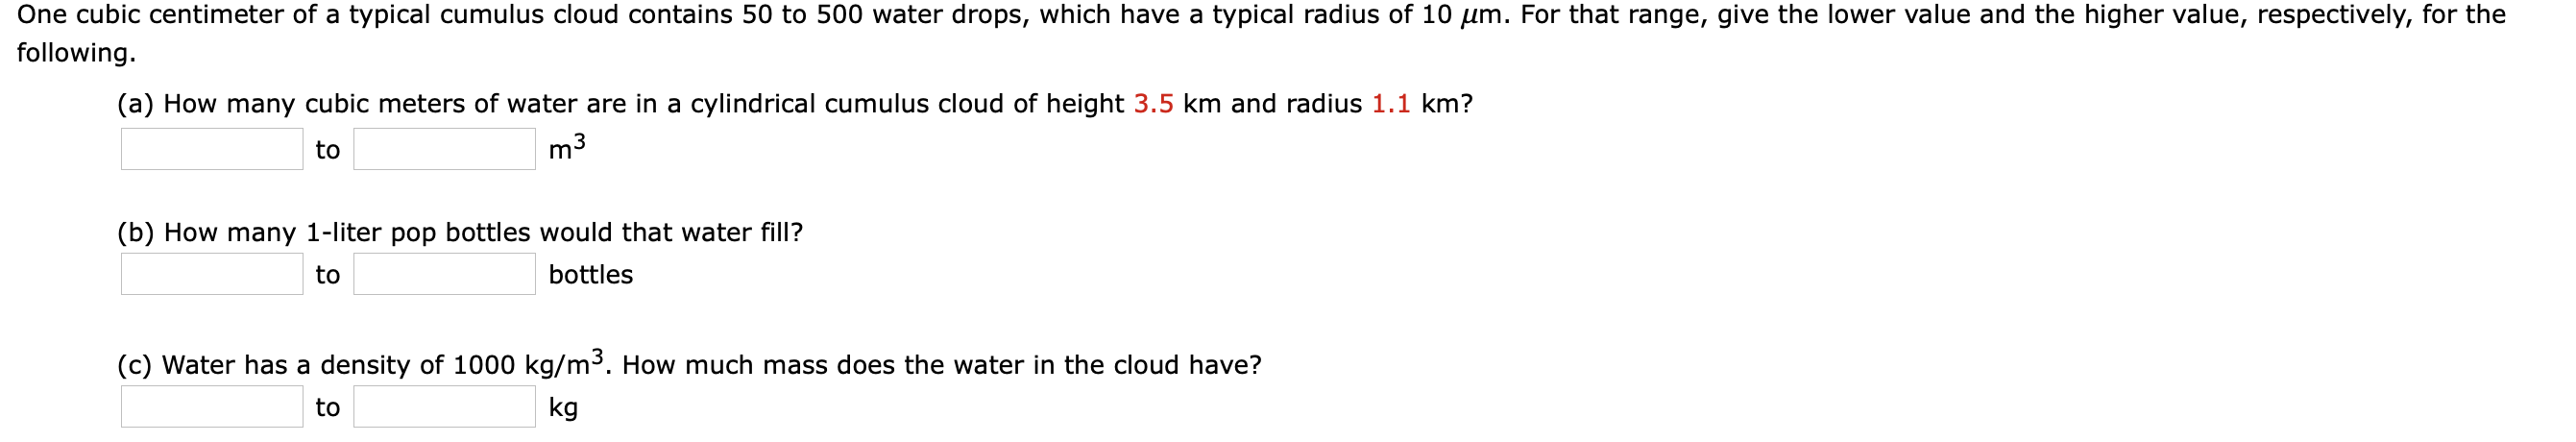 One cubic centimeter of a typical cumulus cloud contains 50 to 500 water drops, which have a typical radius of 10 µm. For that range, give the lower value and the higher value, respectively, for the
following.
(a) How many cubic meters of water are in a cylindrical cumulus cloud of height 3.5 km and radius 1.1 km?
to
m3
(b) How many 1-liter pop bottles would that water fill?
bottles
to
(c) Water has a density of 1000 kg/m3. How much mass does the water in the cloud have?
kg
to
